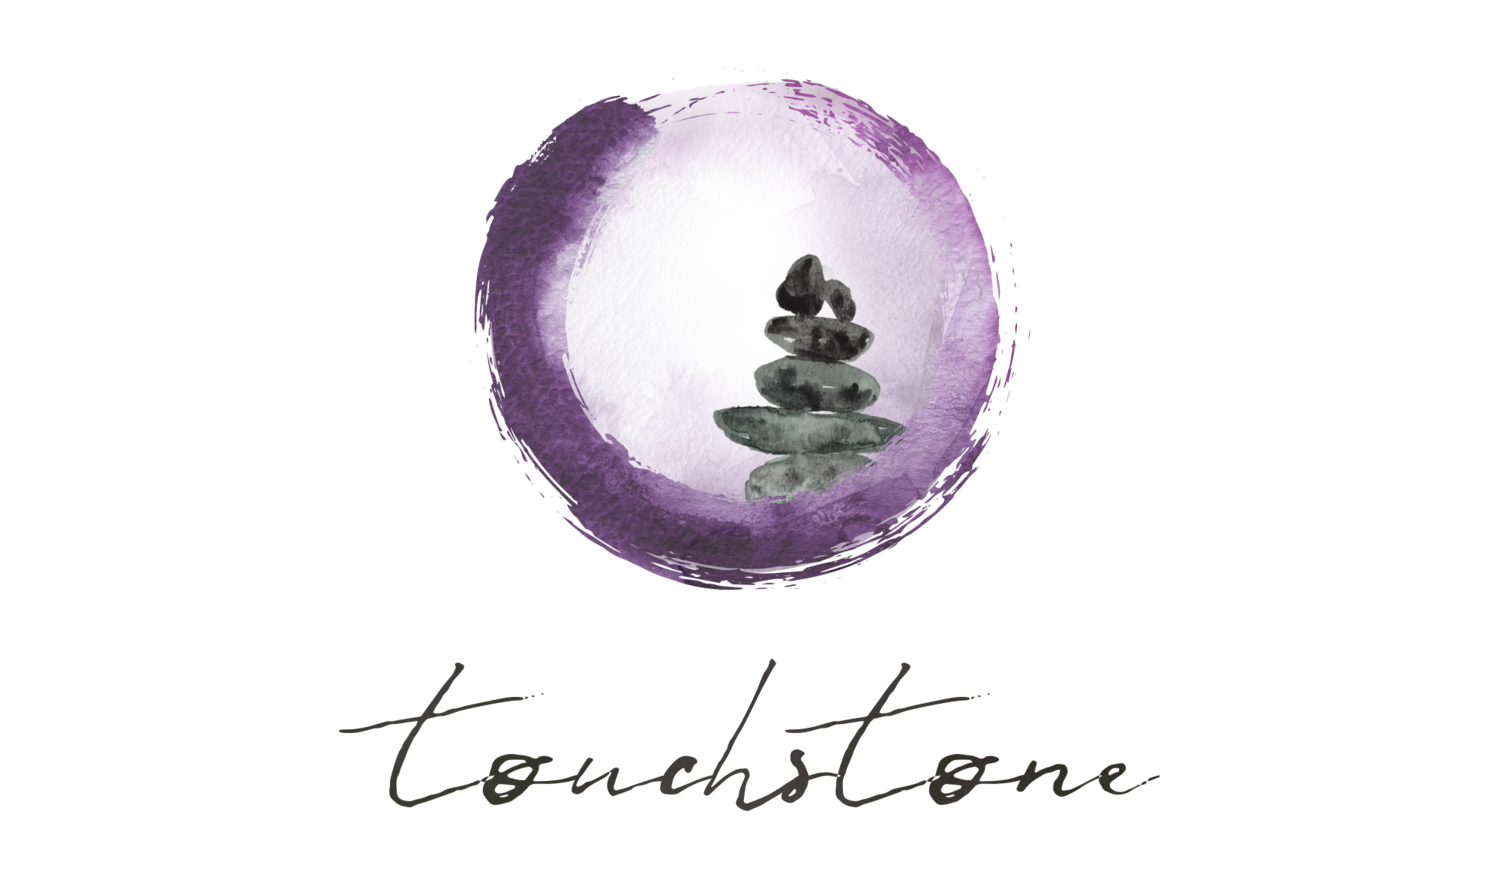 touchstone transformative bodywork and intuitive counseling